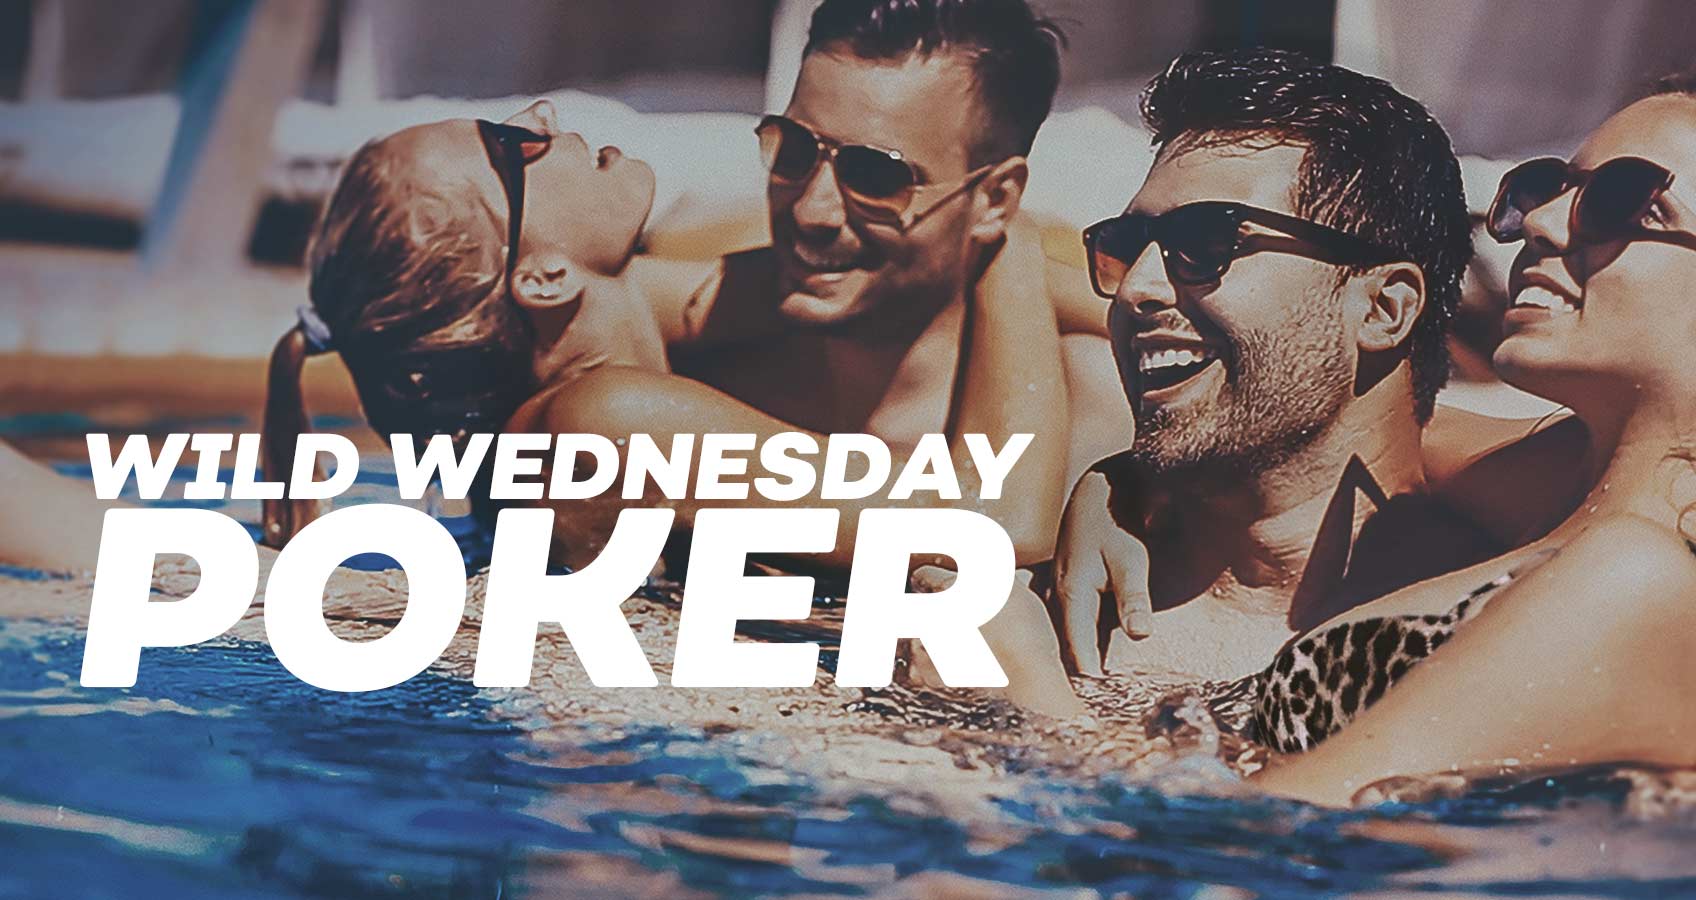 Learn more about Wild Wednesday poker